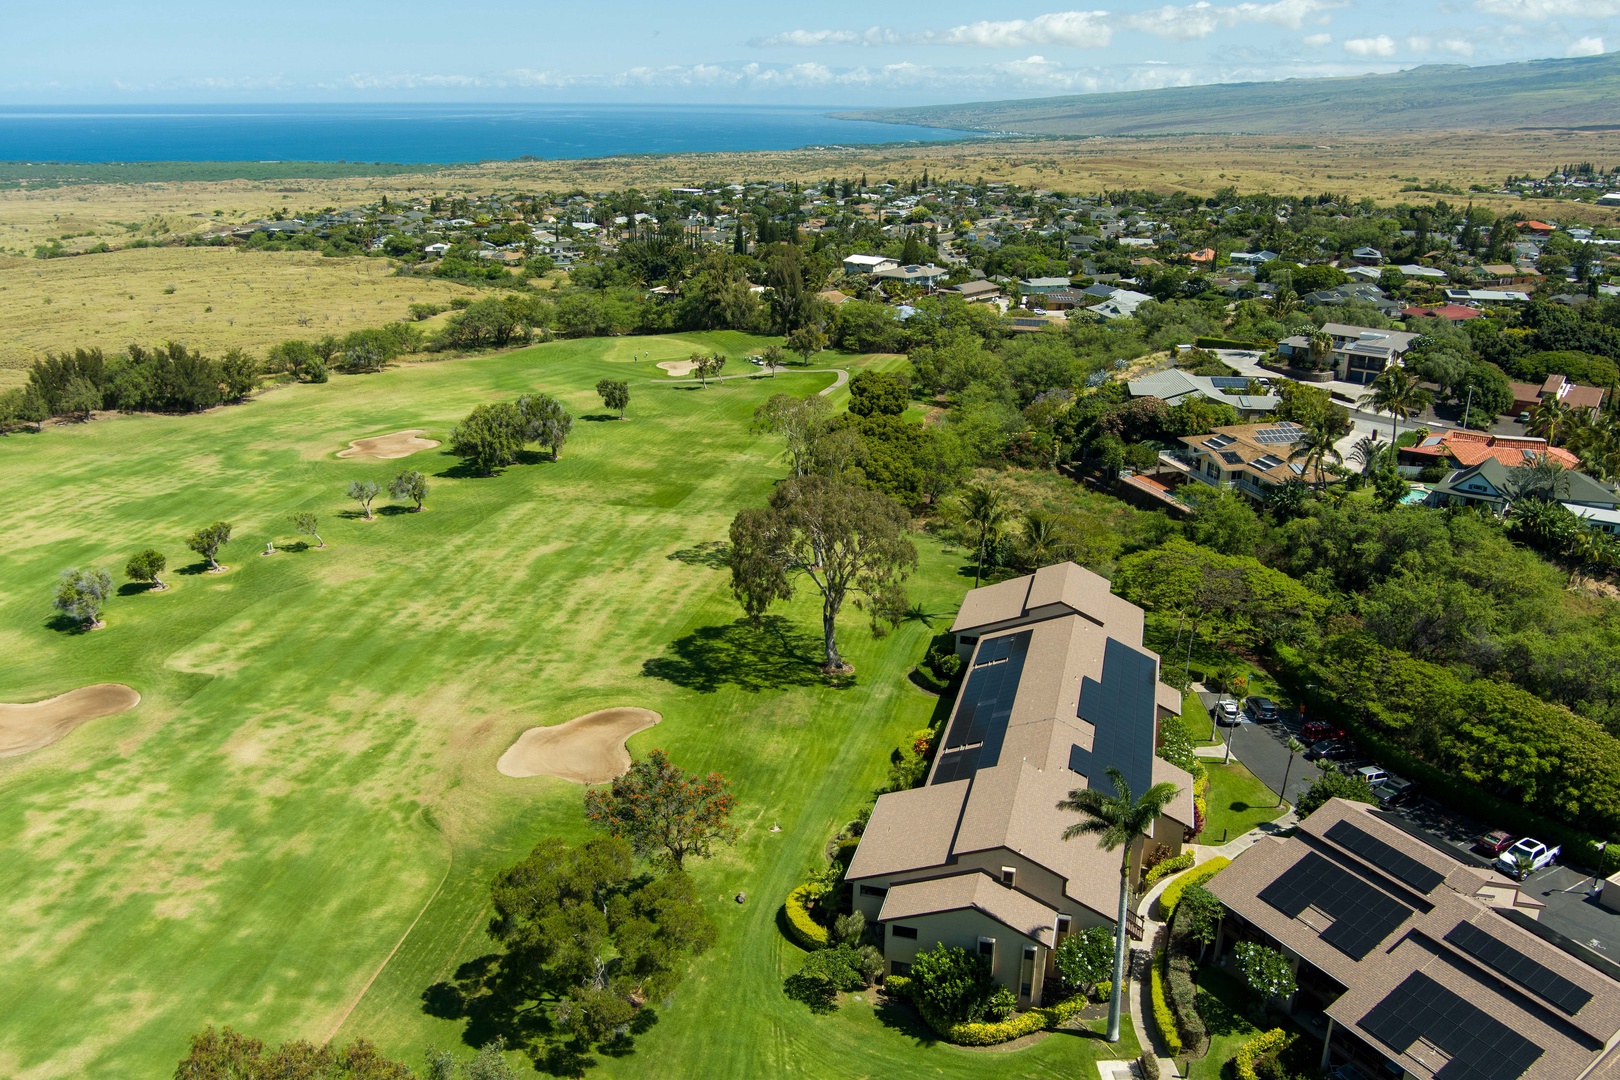 Waikoloa Vacation Rentals, Waikoloa Villas A107 - Waikoloa Village is a Friendly Residential Community Just 7 miles from the Best Beaches!